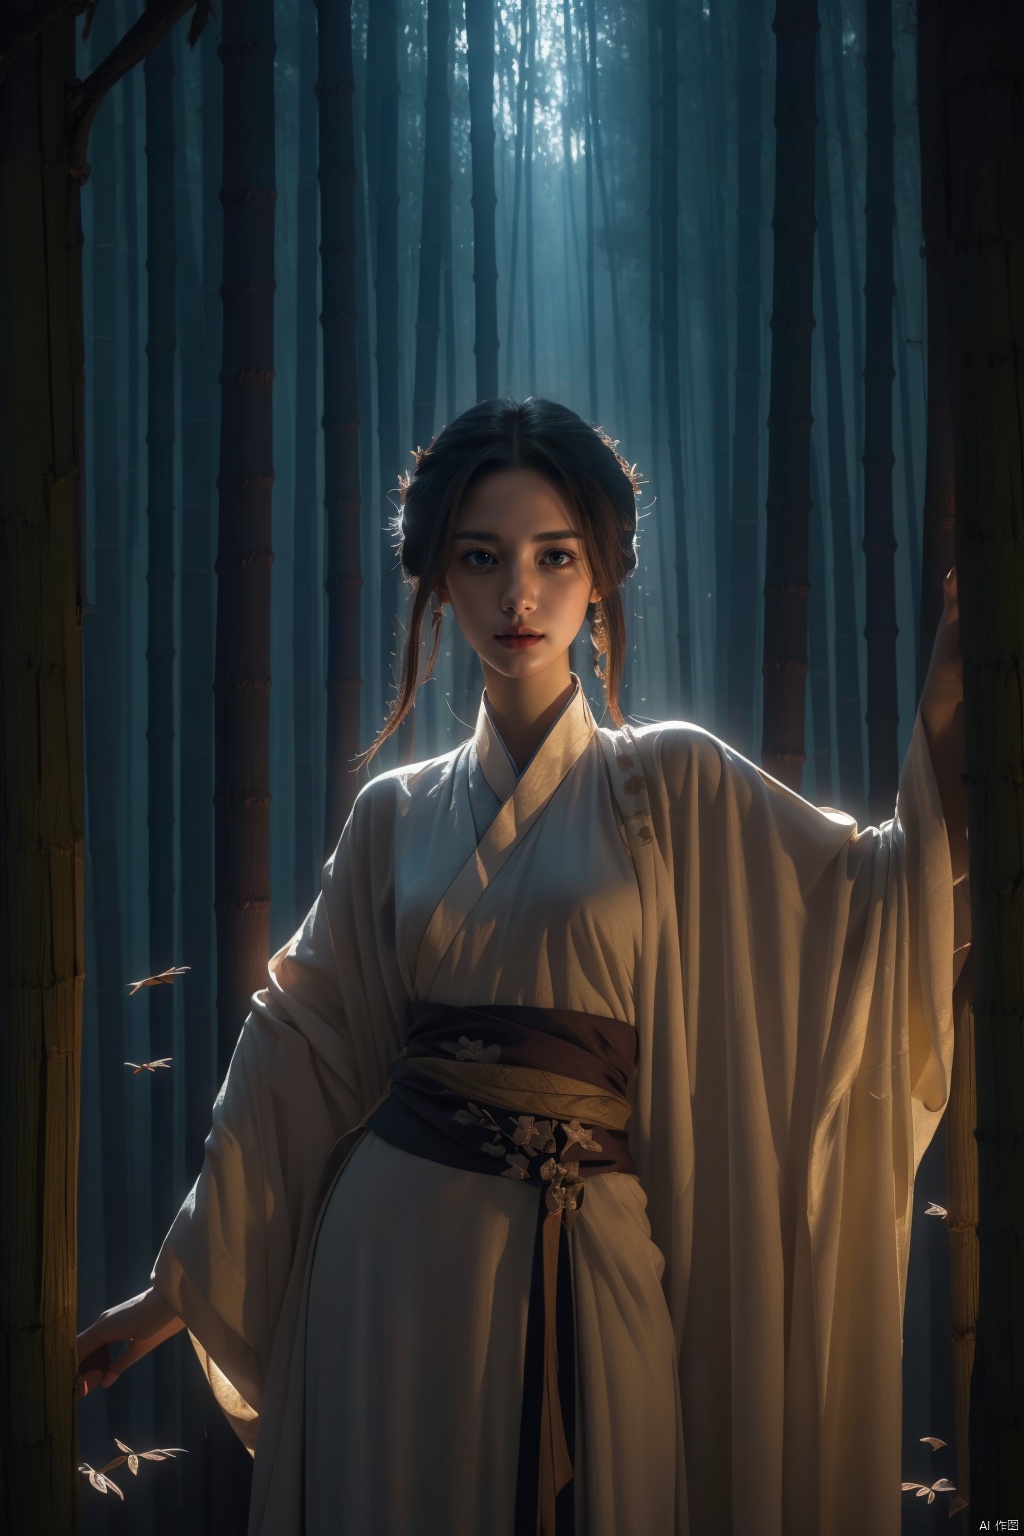 1girl, hanfu,masterpiece, best quality, super wide angle, best fingers, facing viewer, full frontal, magnificent, celestial, ethereal, painterly, epic, majestic, magical, fantasy art, cover art, dreamy, elegant, cinematic, background illuminated, rich deep colors, ambient dramatic atmosphere, creative, perfect, beautiful composition, intricate, detailed
 light and shadow interweaving, atmosphere creation, detail processing, visual appeal,